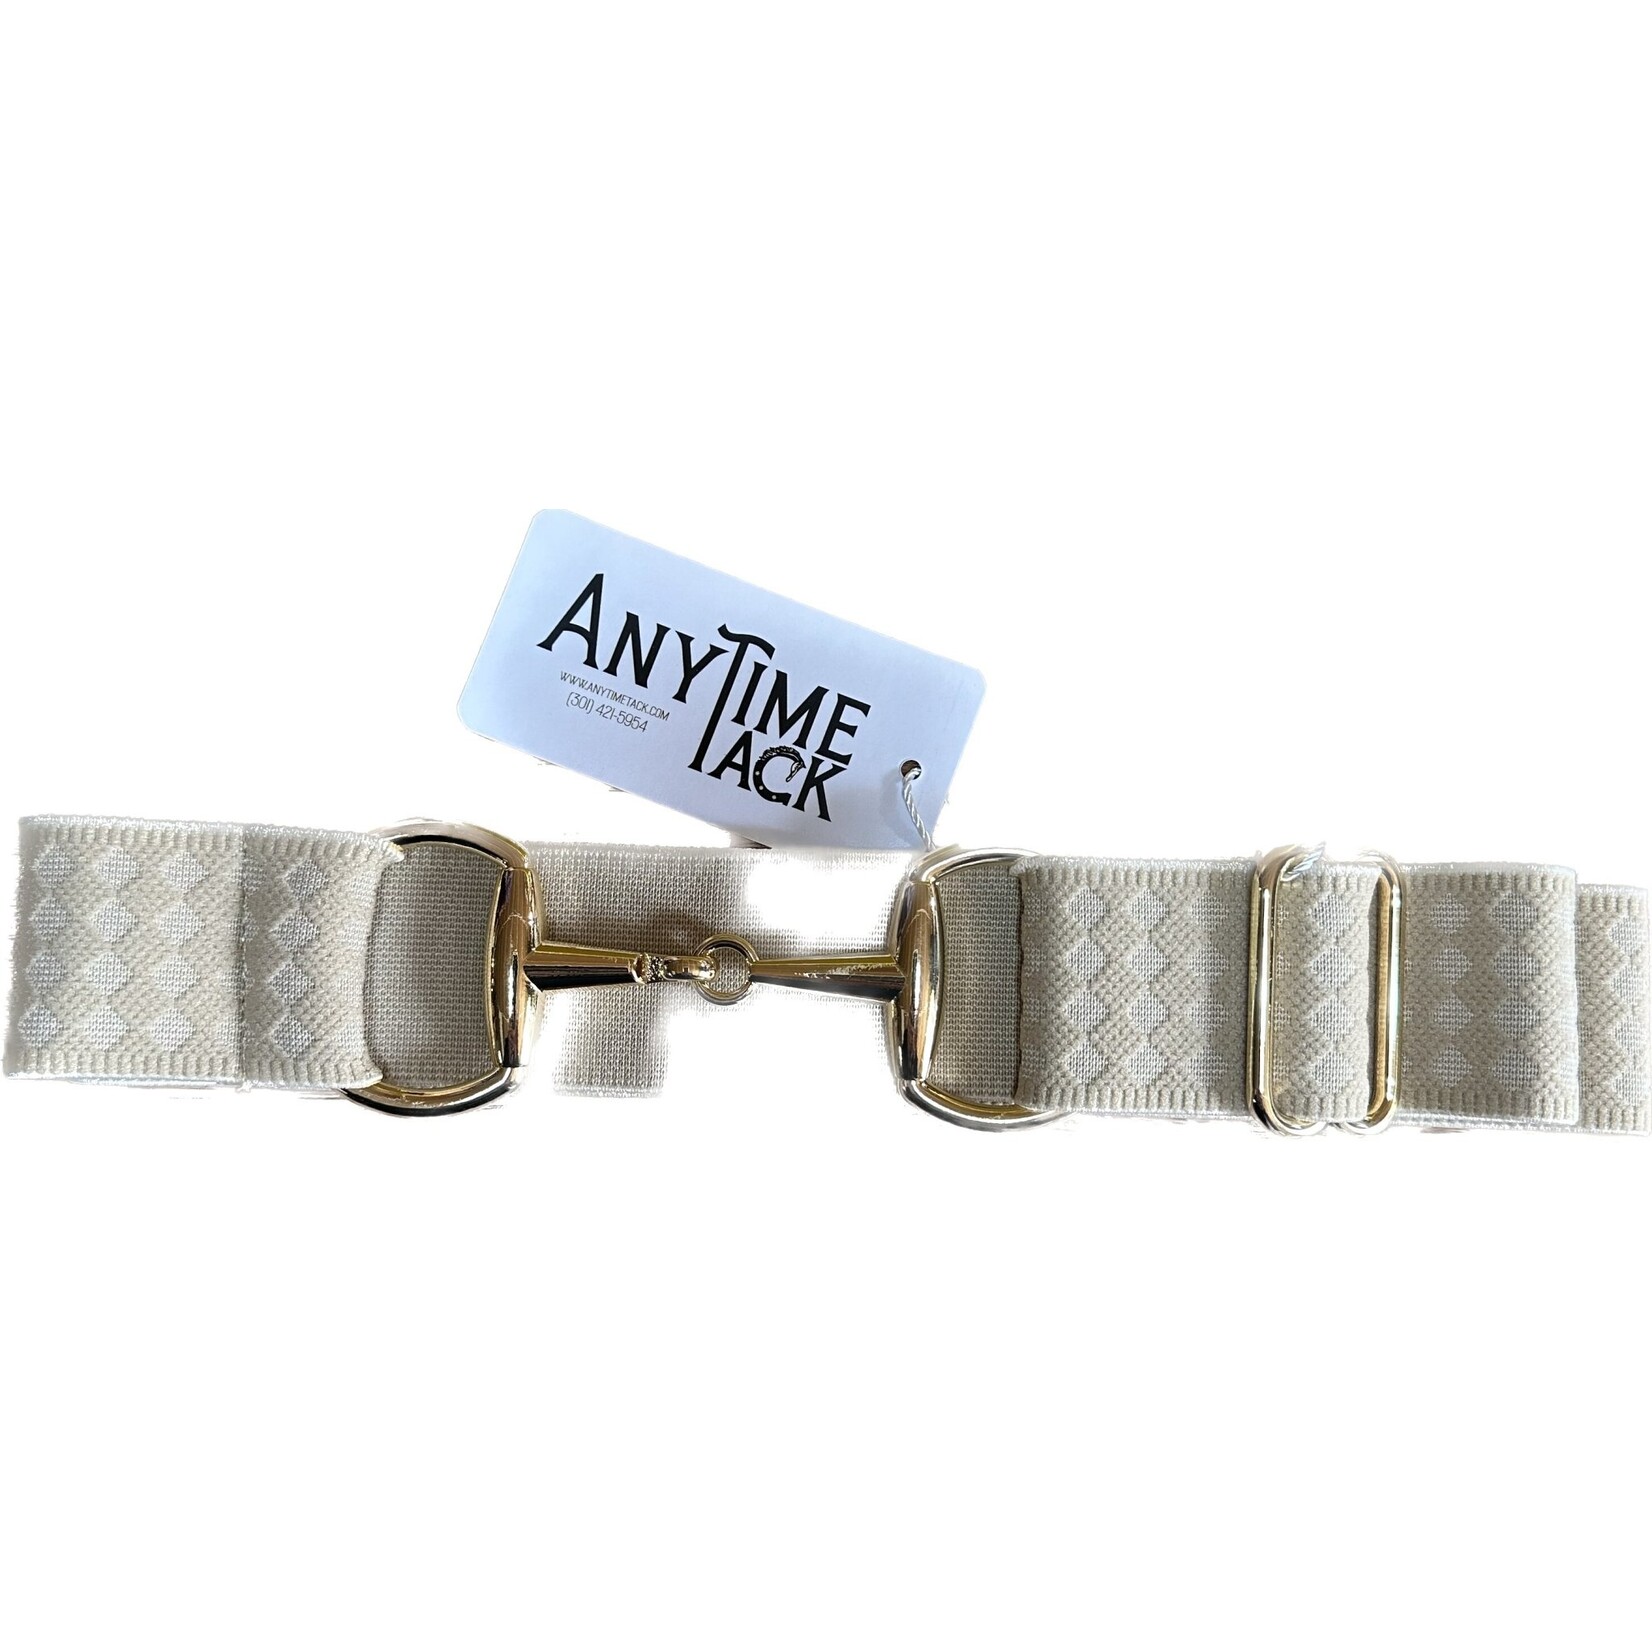 Anytime Tack Anytime Tack Essential Diamonds Snaffle Riding Belt